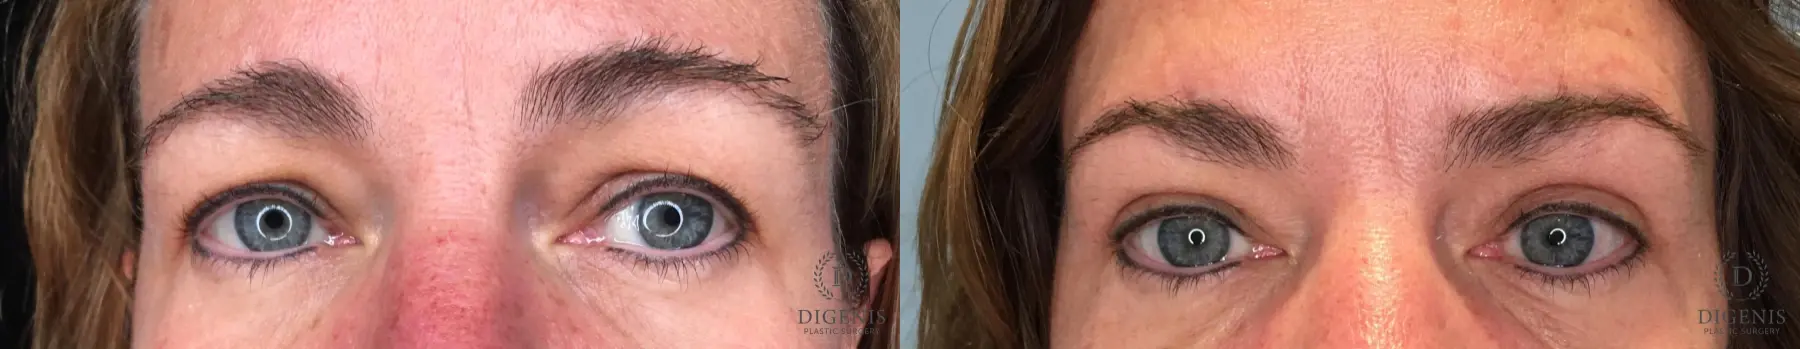 Blepharoplasty: Patient 9 - Before and After 1